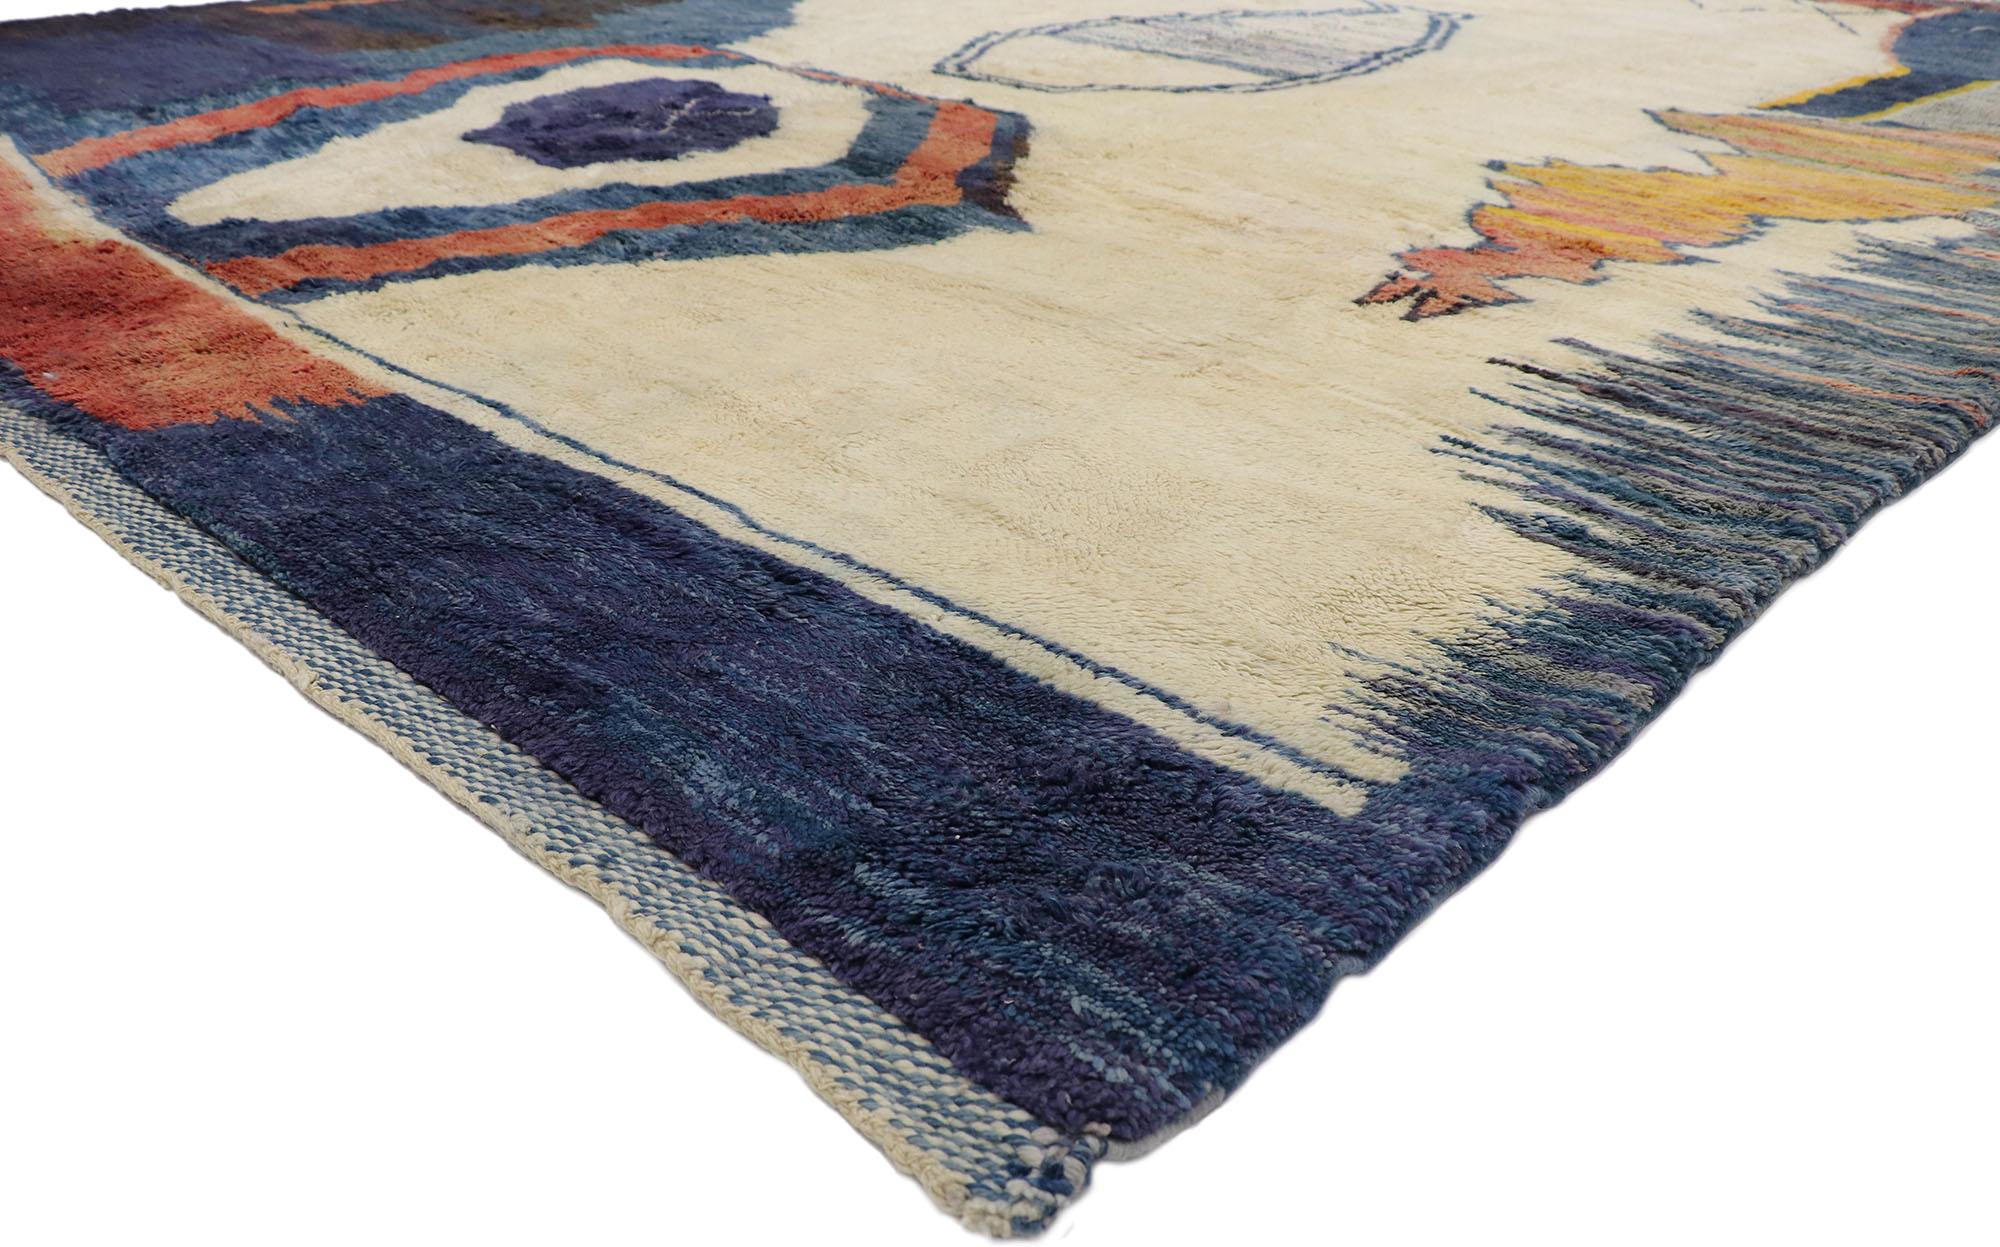 21140 Oversized Abstract Moroccan Rug, 13'04 x 17'04.
Emulating Wabi-Sabi and Abstract Expressionist style, this hand knotted wool oversized Berber Moroccan rug is a captivating vision of woven beauty. The perfectly imperfect tribal design and